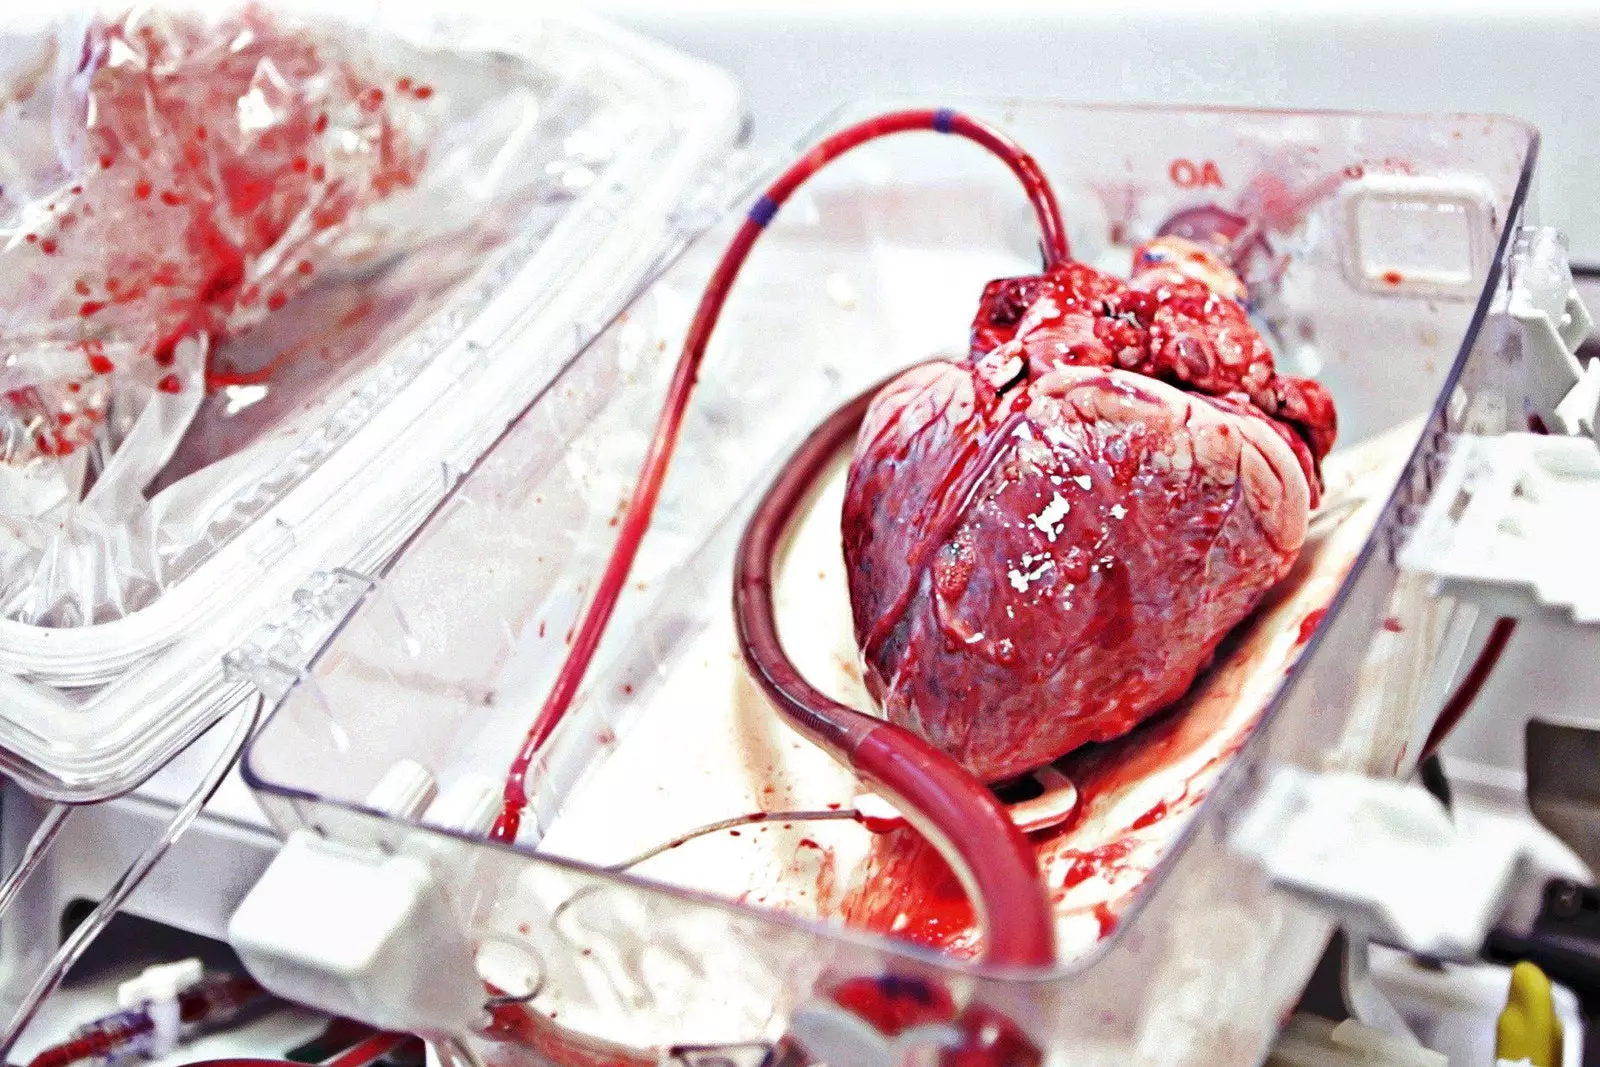 A heart donated for heart transplants